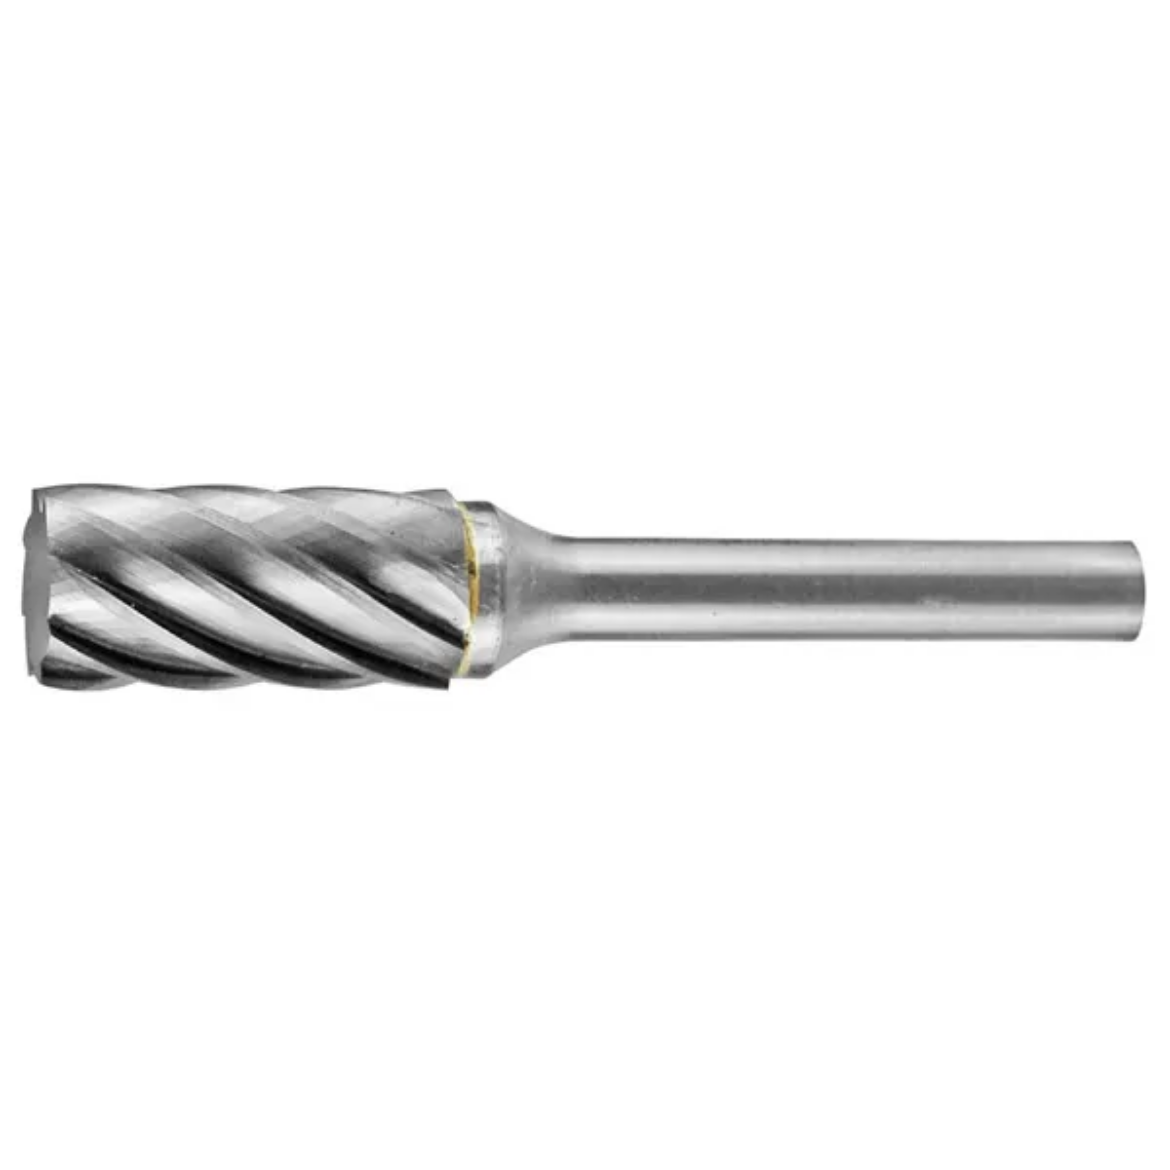 Picture of HOLEMAKER CARBIDE BURR CYLINDRICAL SQUARE END 1/4" X 3/4" HEAD 1/4" SHANK AC